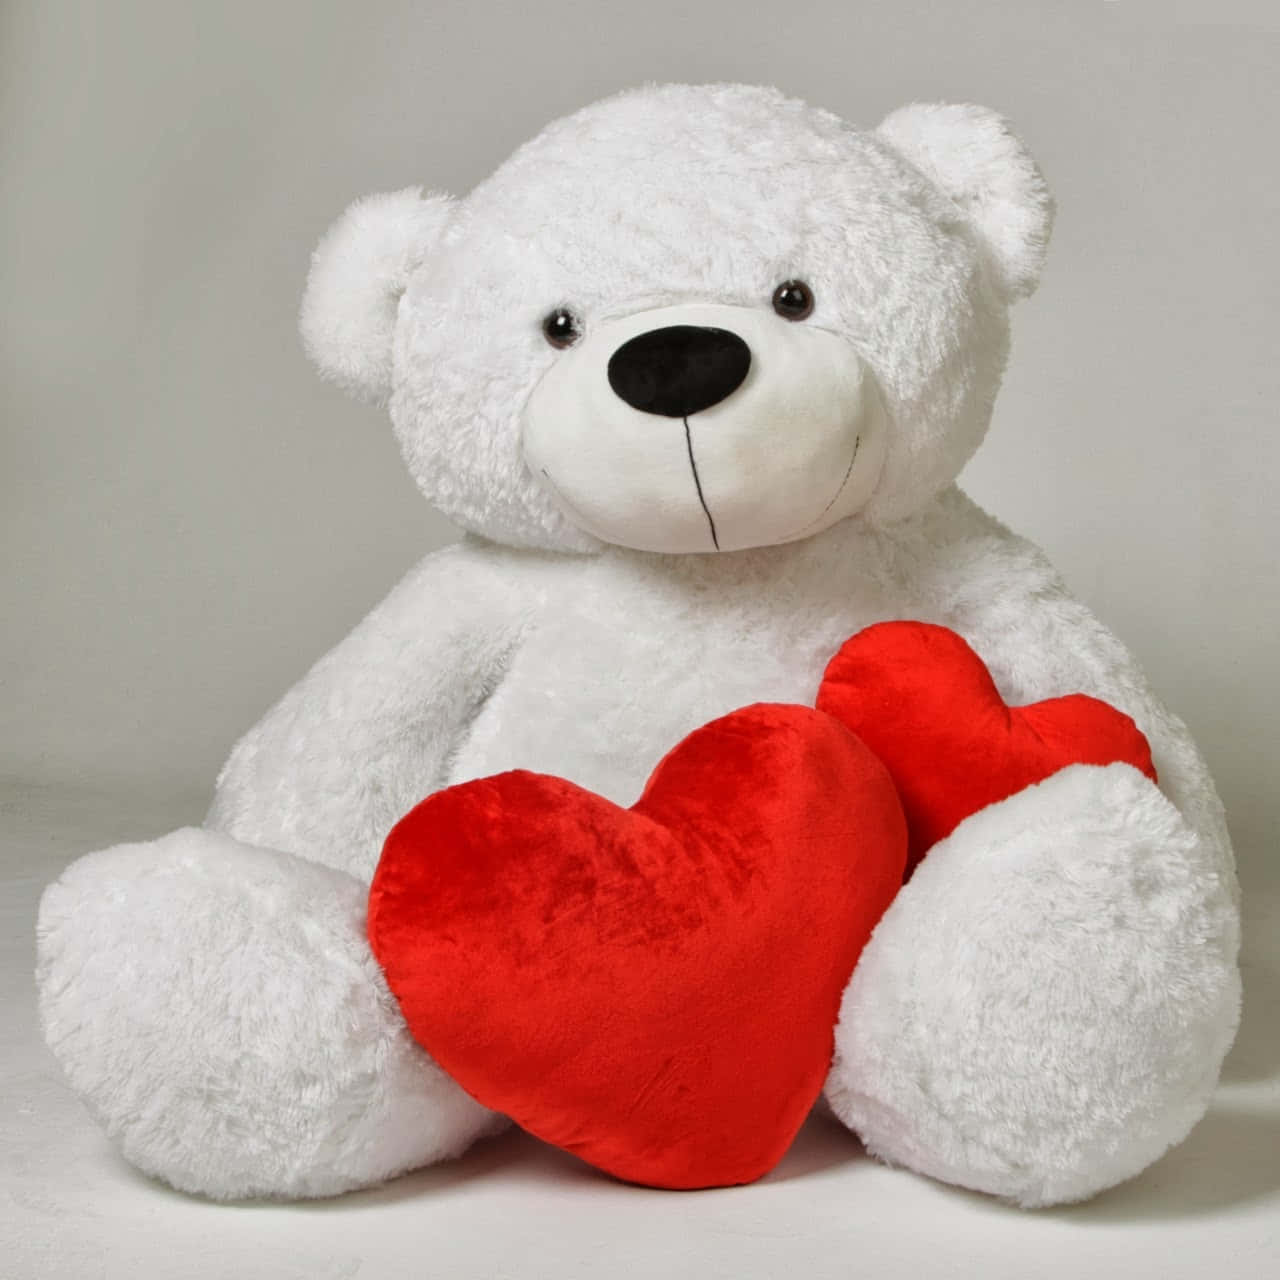 Heartwarming teddy that will win your heart in no time